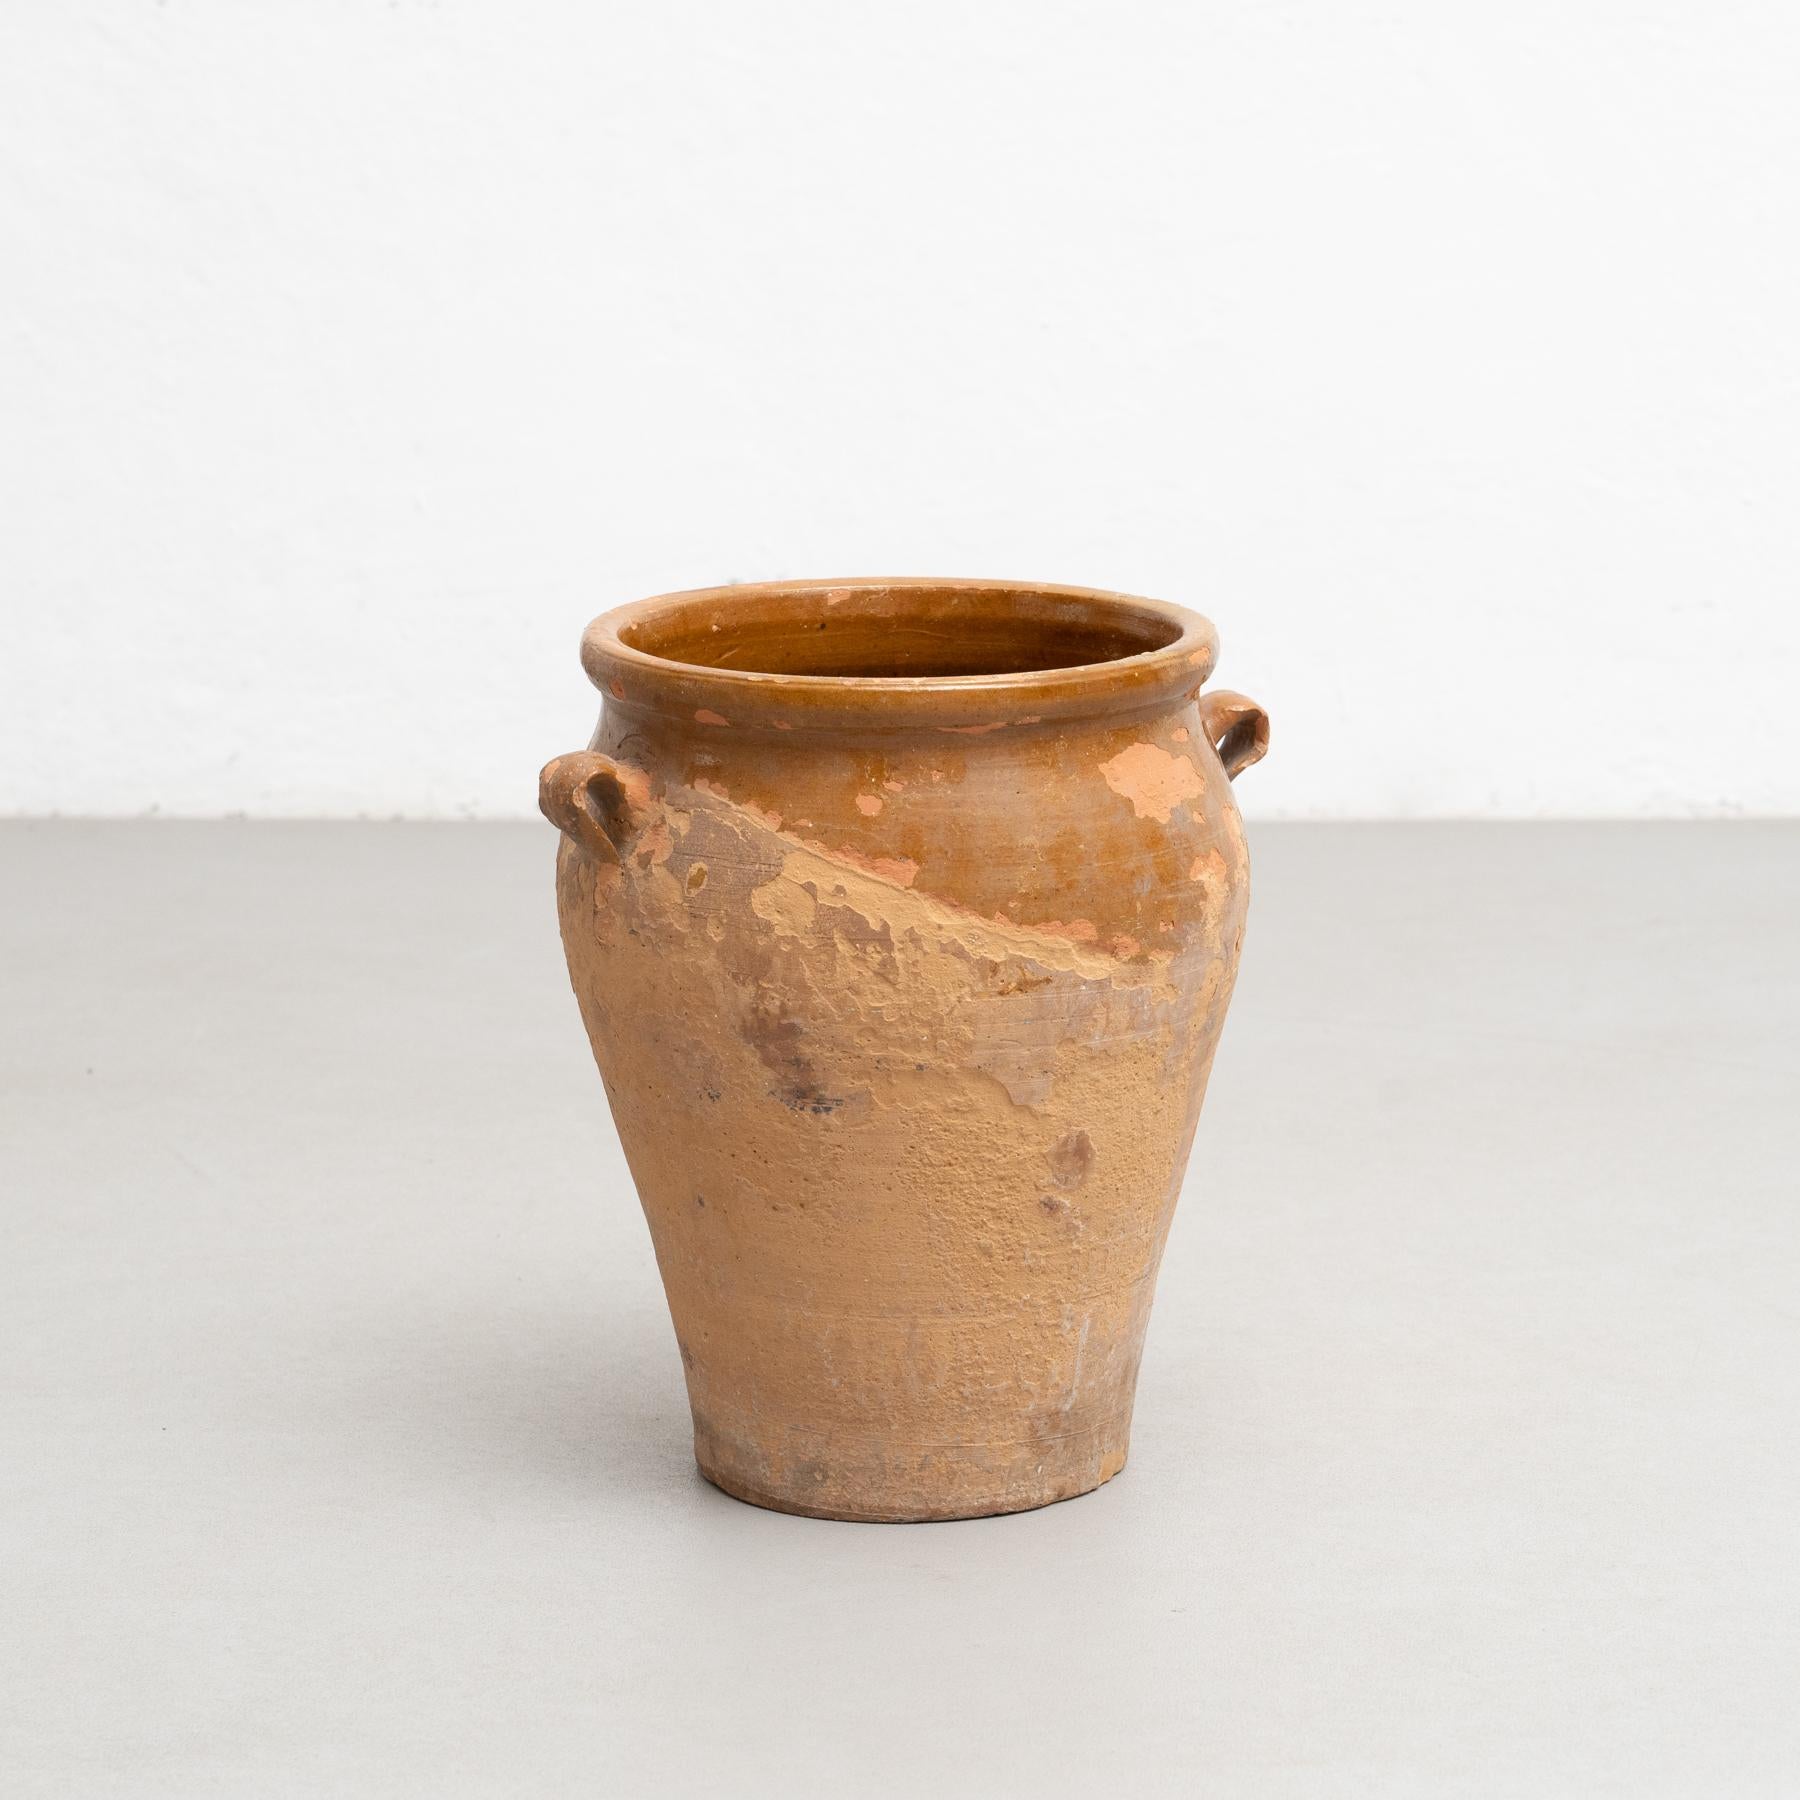 Traditional Catalan ceramic planter, circa 1960.

Manufactured in Spain.

In original condition, with minor wear consistent of age and use, preserving a beautiful patina.

Materials:
Ceramic.

 